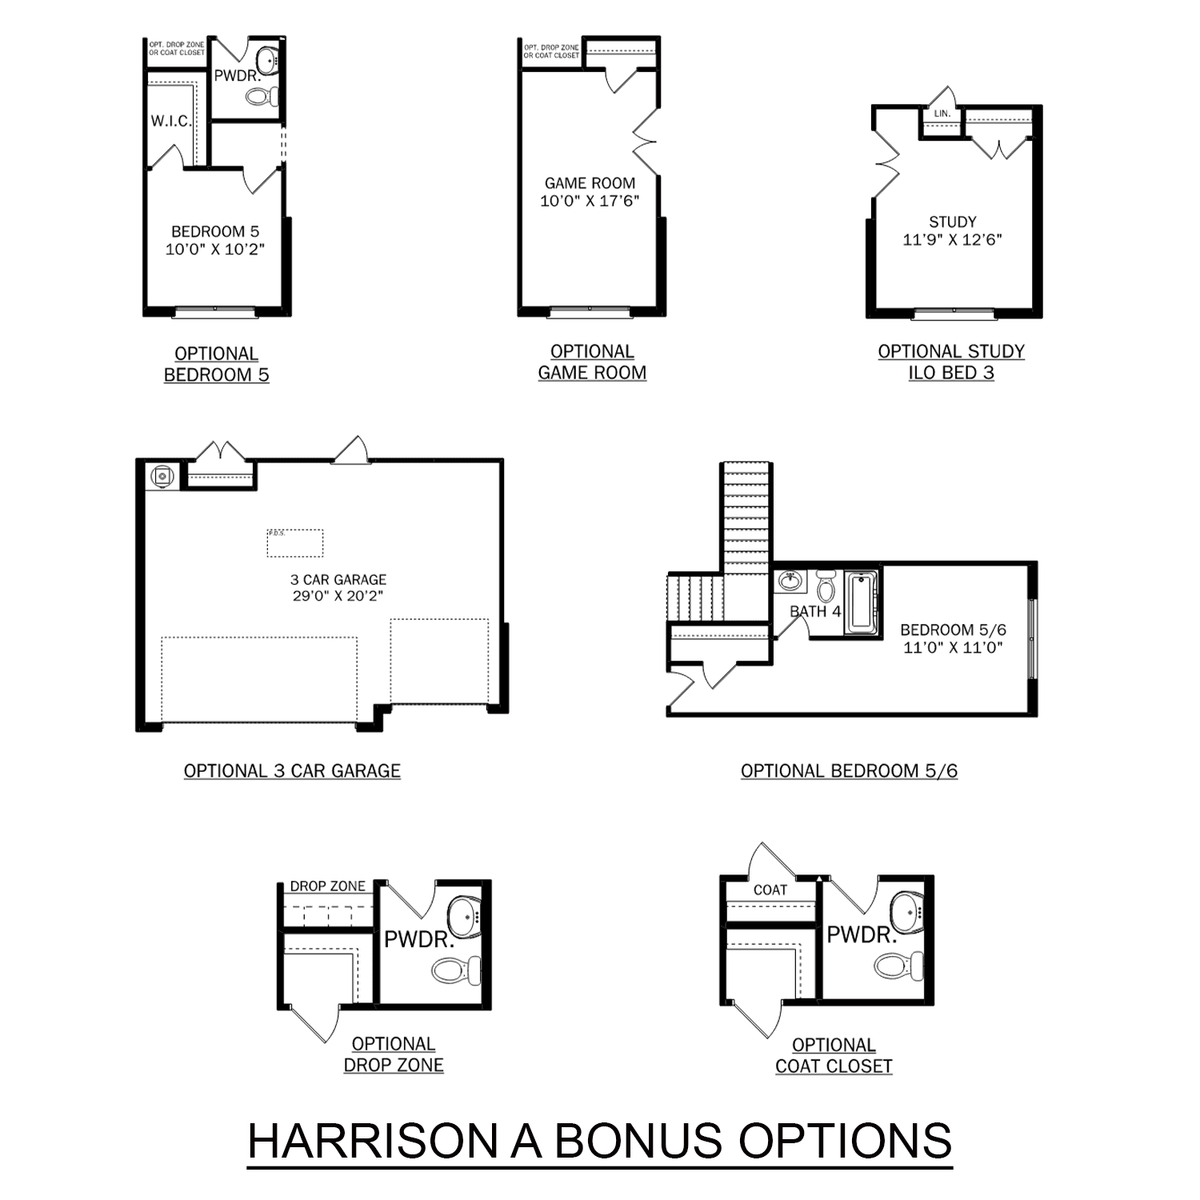 3 - The Harrison with Bonus buildable floor plan layout in Davidson Homes' Cain Park community.